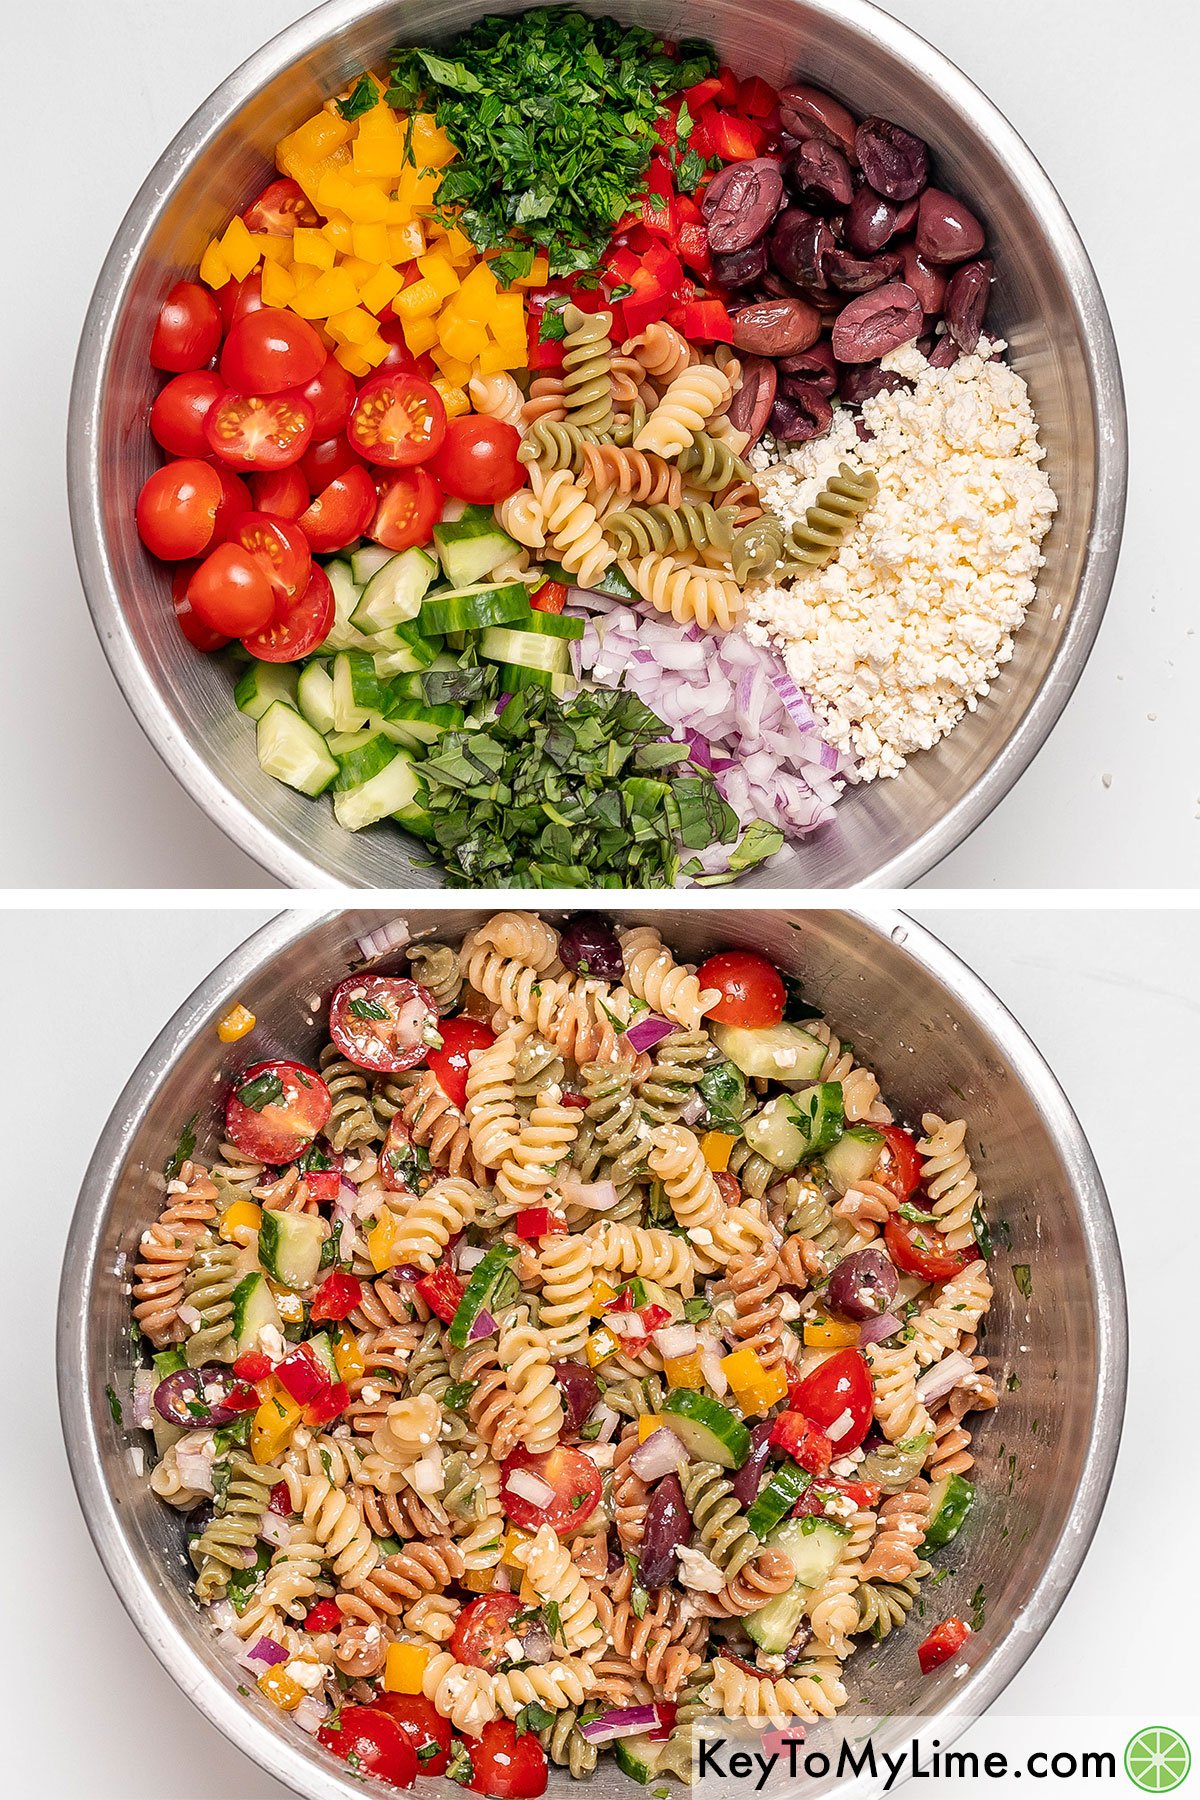 Tossing the pasta noodles, fresh vegetables, feta and fresh herbs together then mixing and adding in the dressing until the pasta ingredients are fully coated.